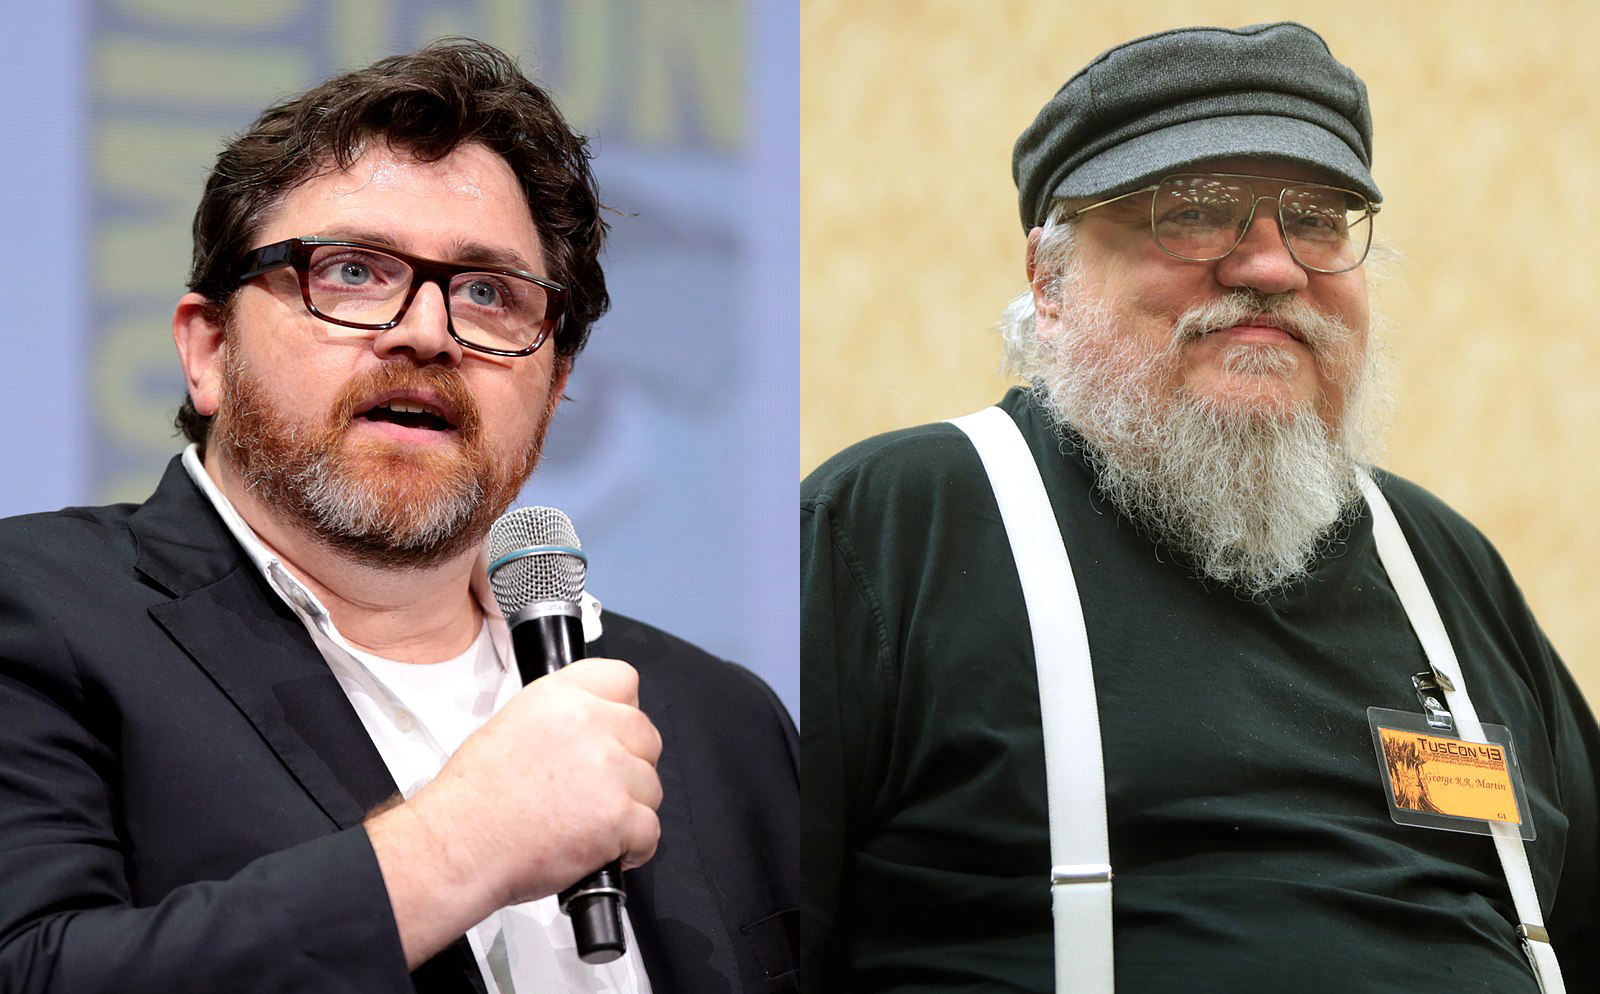 'Ready Player One' Author Ernest Cline Once Complained to George R.R. Martin About How Long It Takes to Write a Book 